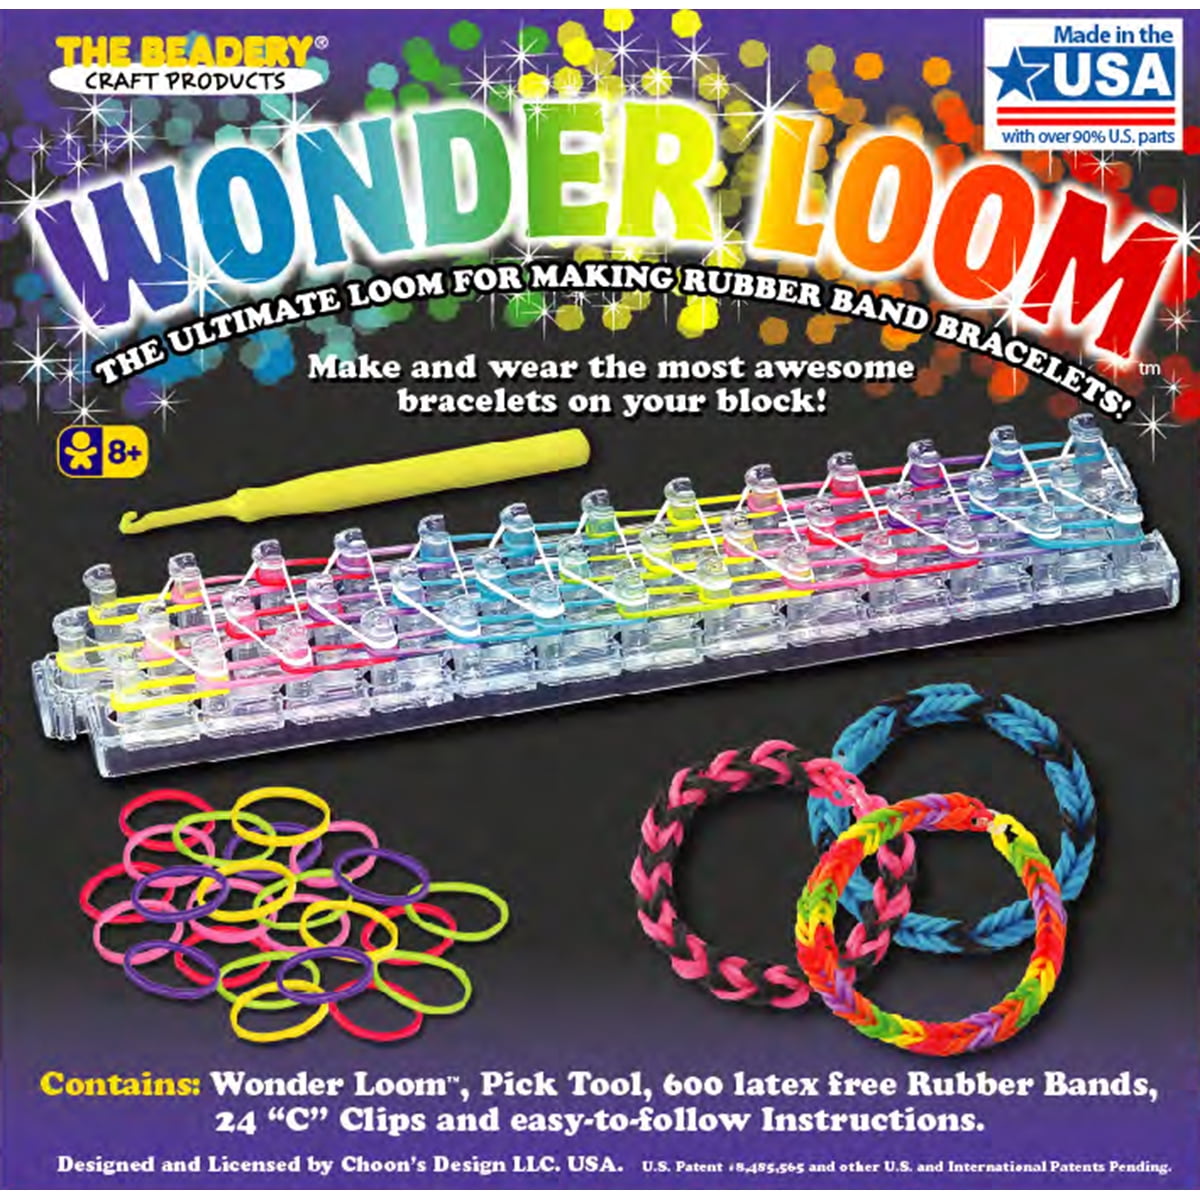 The Beadery Wonder Loom Kit, Gift for Kids, Includes 600 Rubber